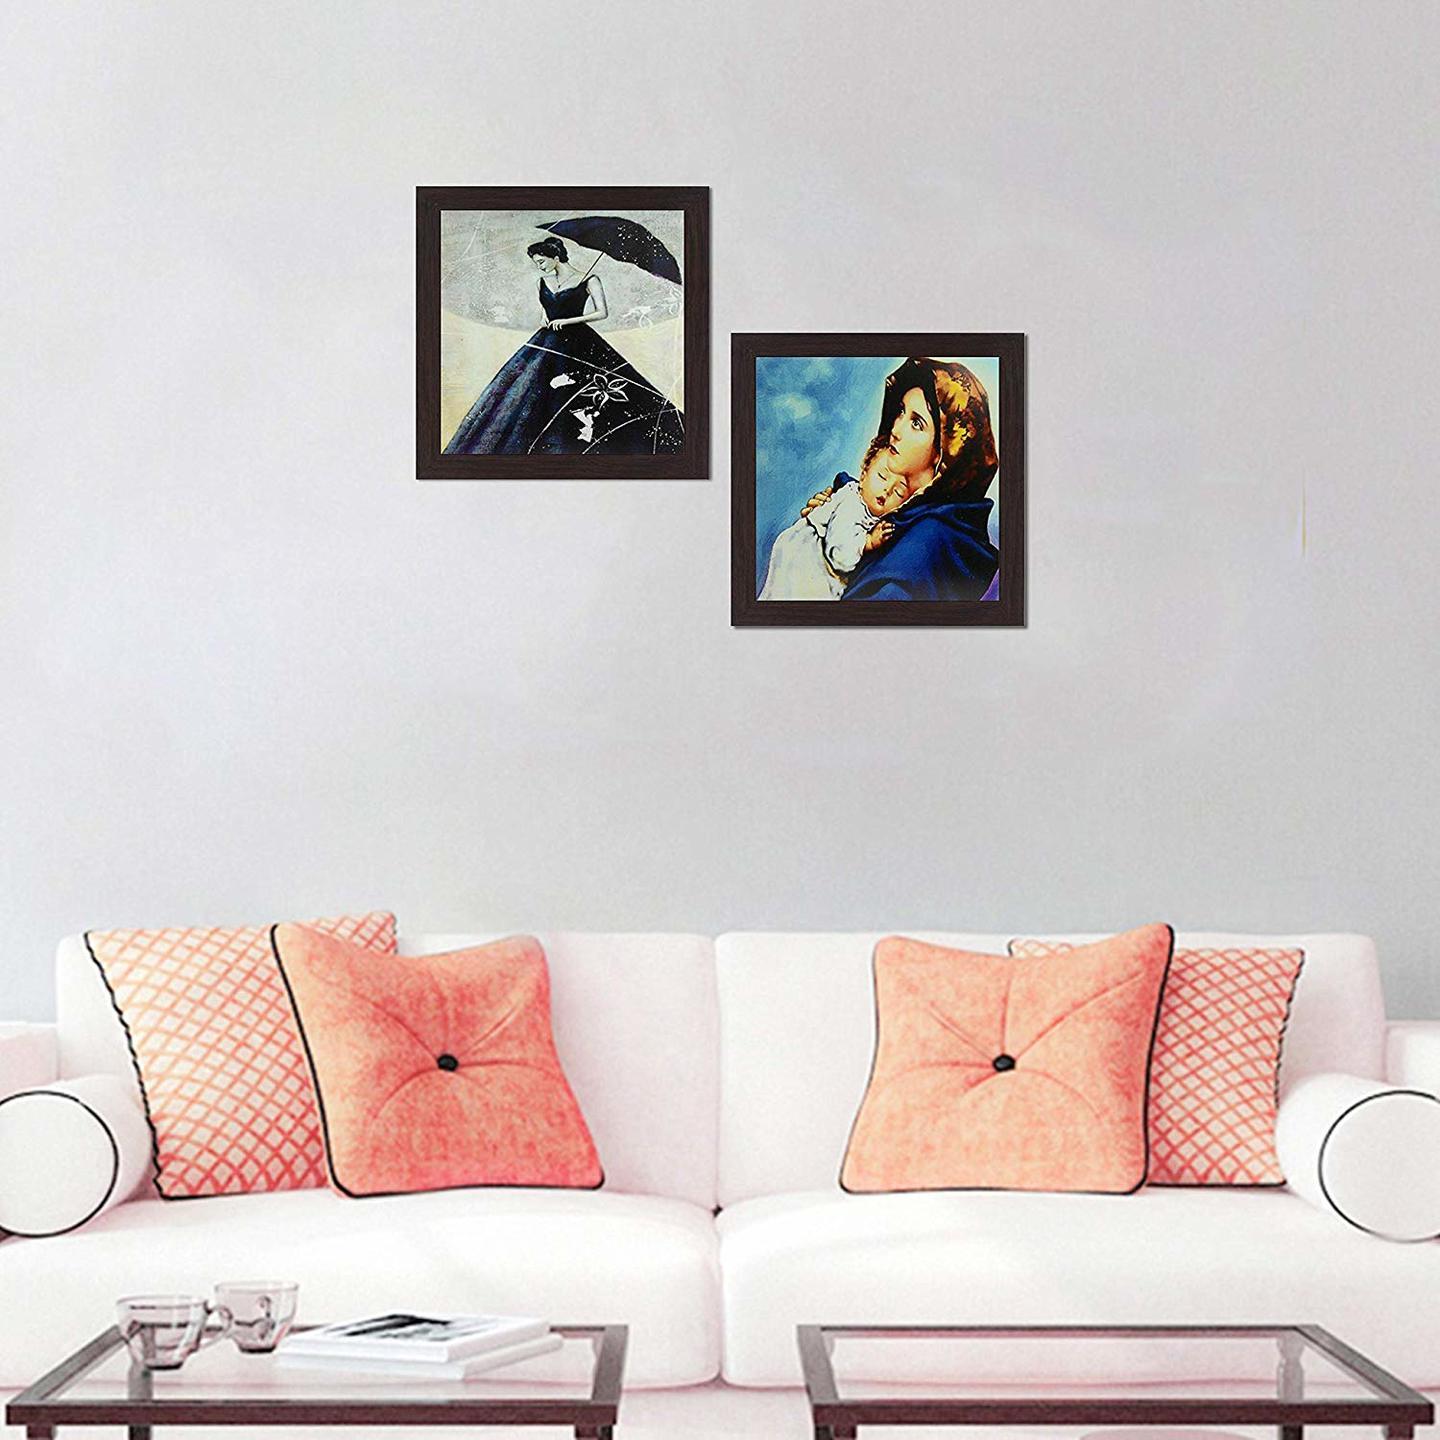 Set of 2 Wall Hanging Paintings - Modern Lady